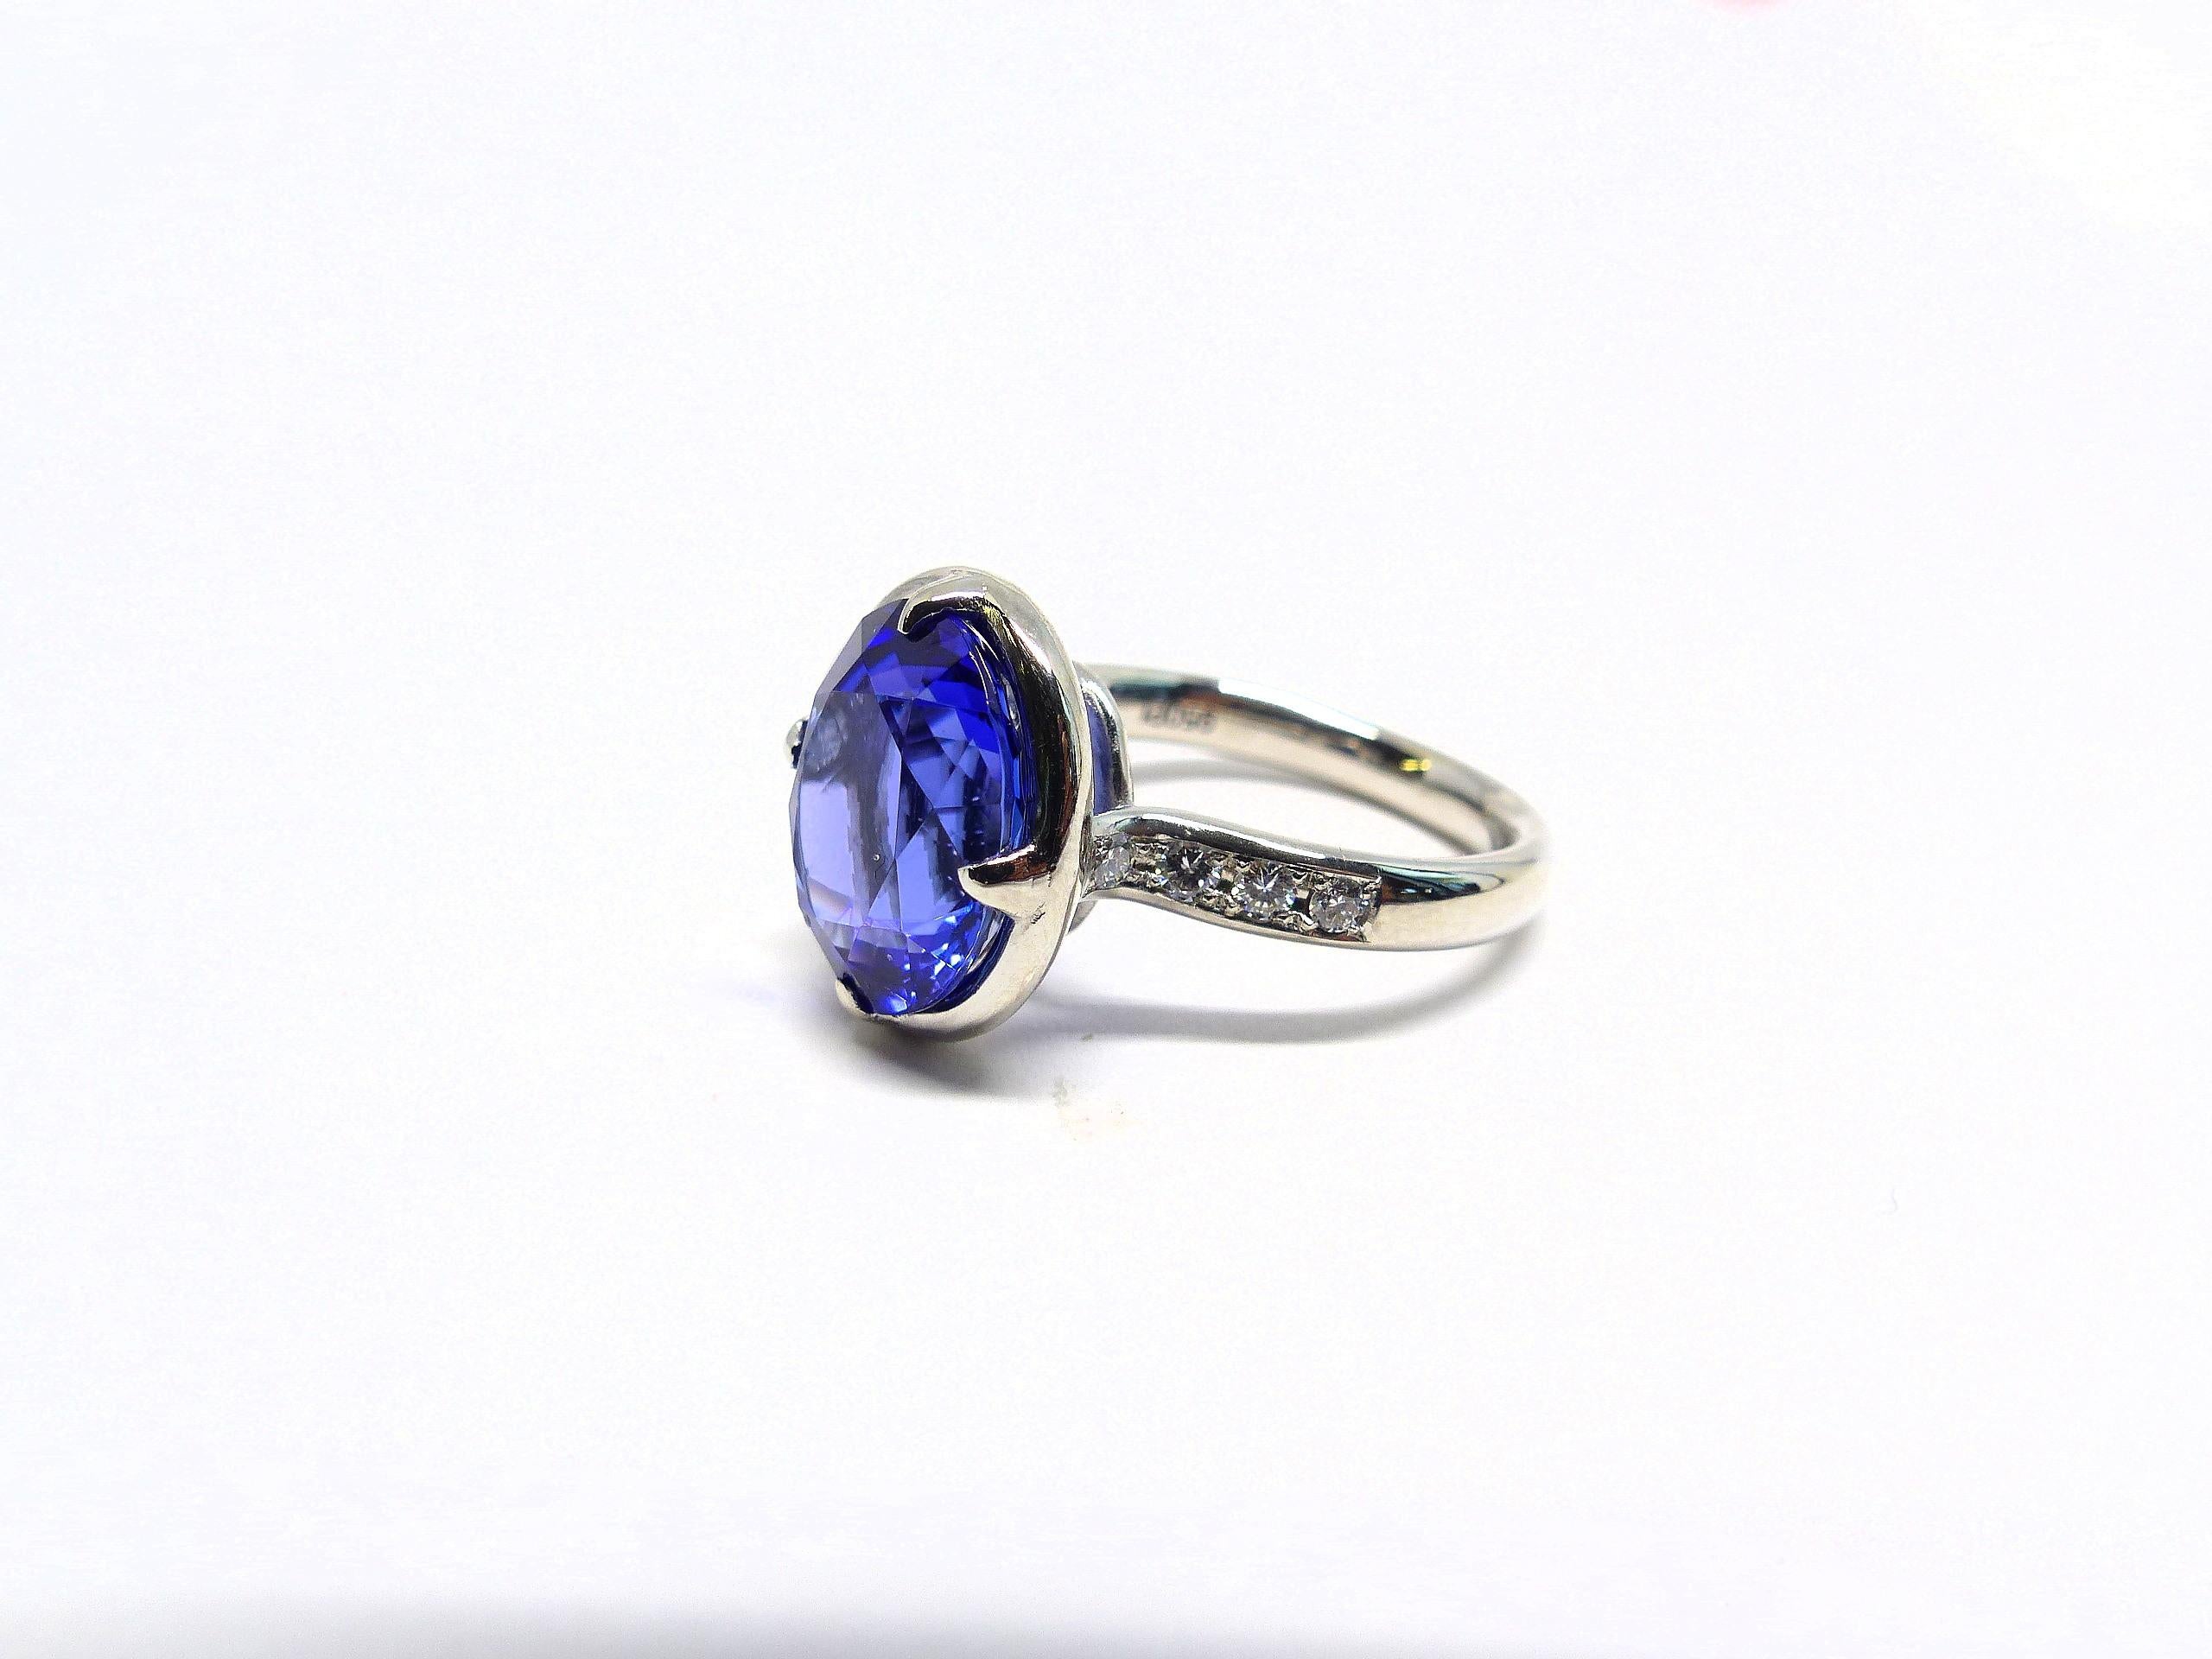 Oval Cut Ring in Platinum with 1 Tanzanite oval 13x11mm, 7, 50ct. and Diamonds. For Sale